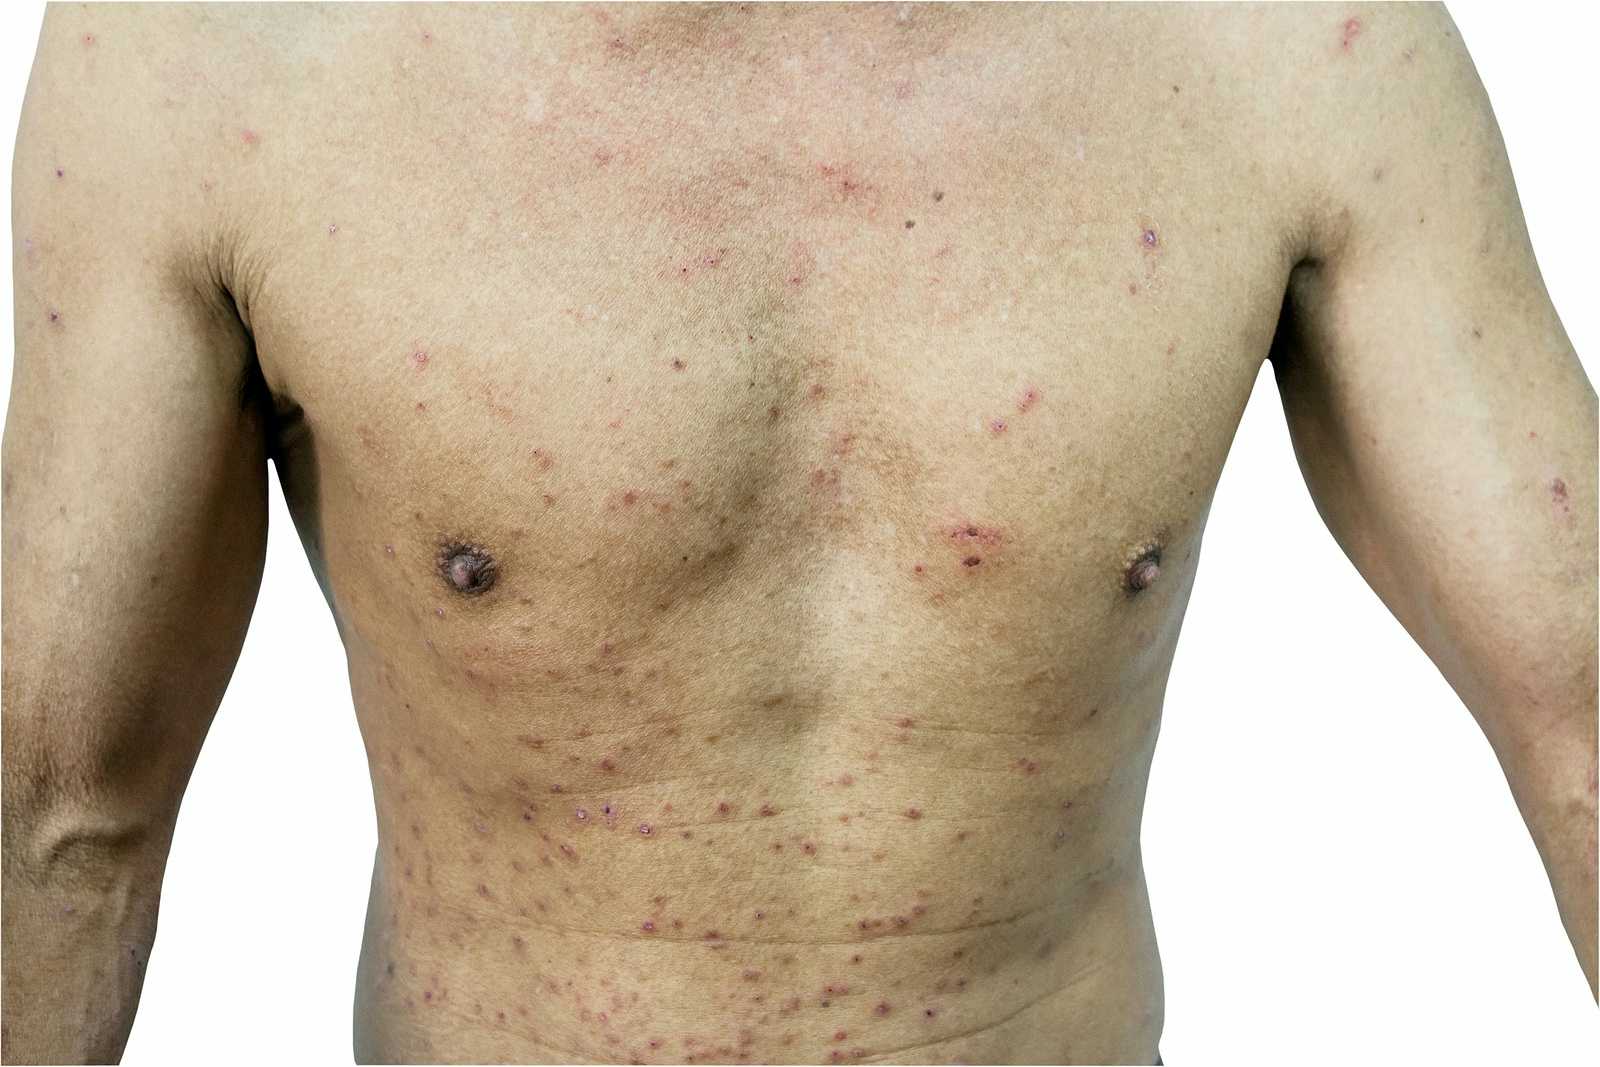 Here's when to worry about a rash in adults - VSM Pharmacy